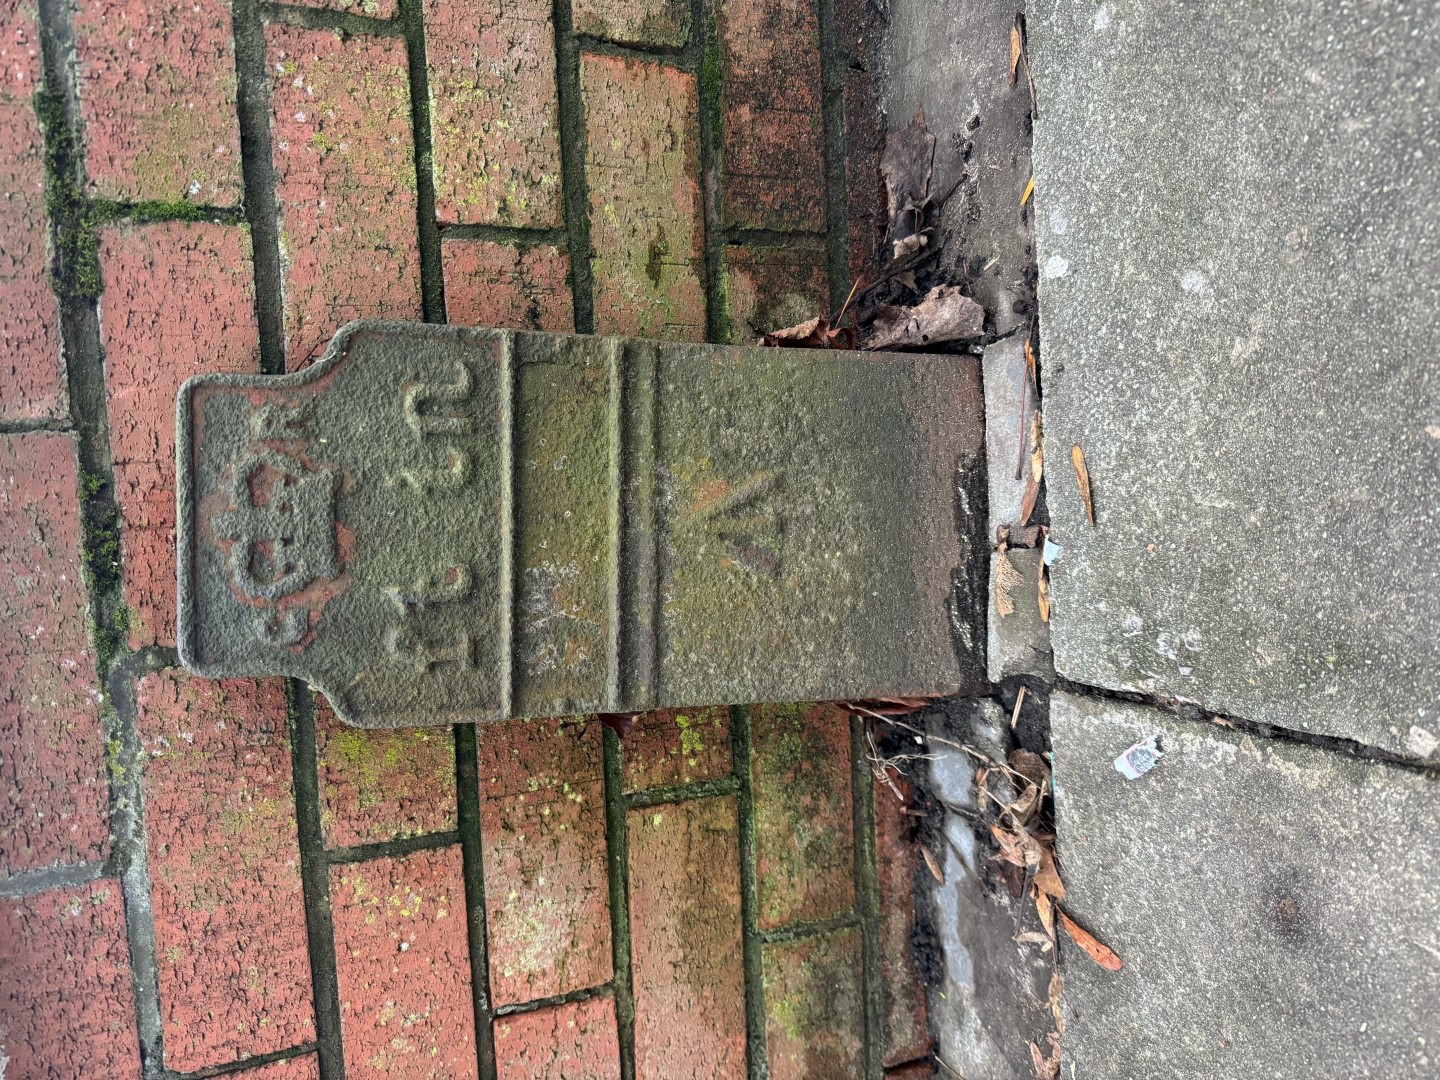 Telegraph cable marker post at 250 Scarisbrick New Road, Southport by David Gallacher 